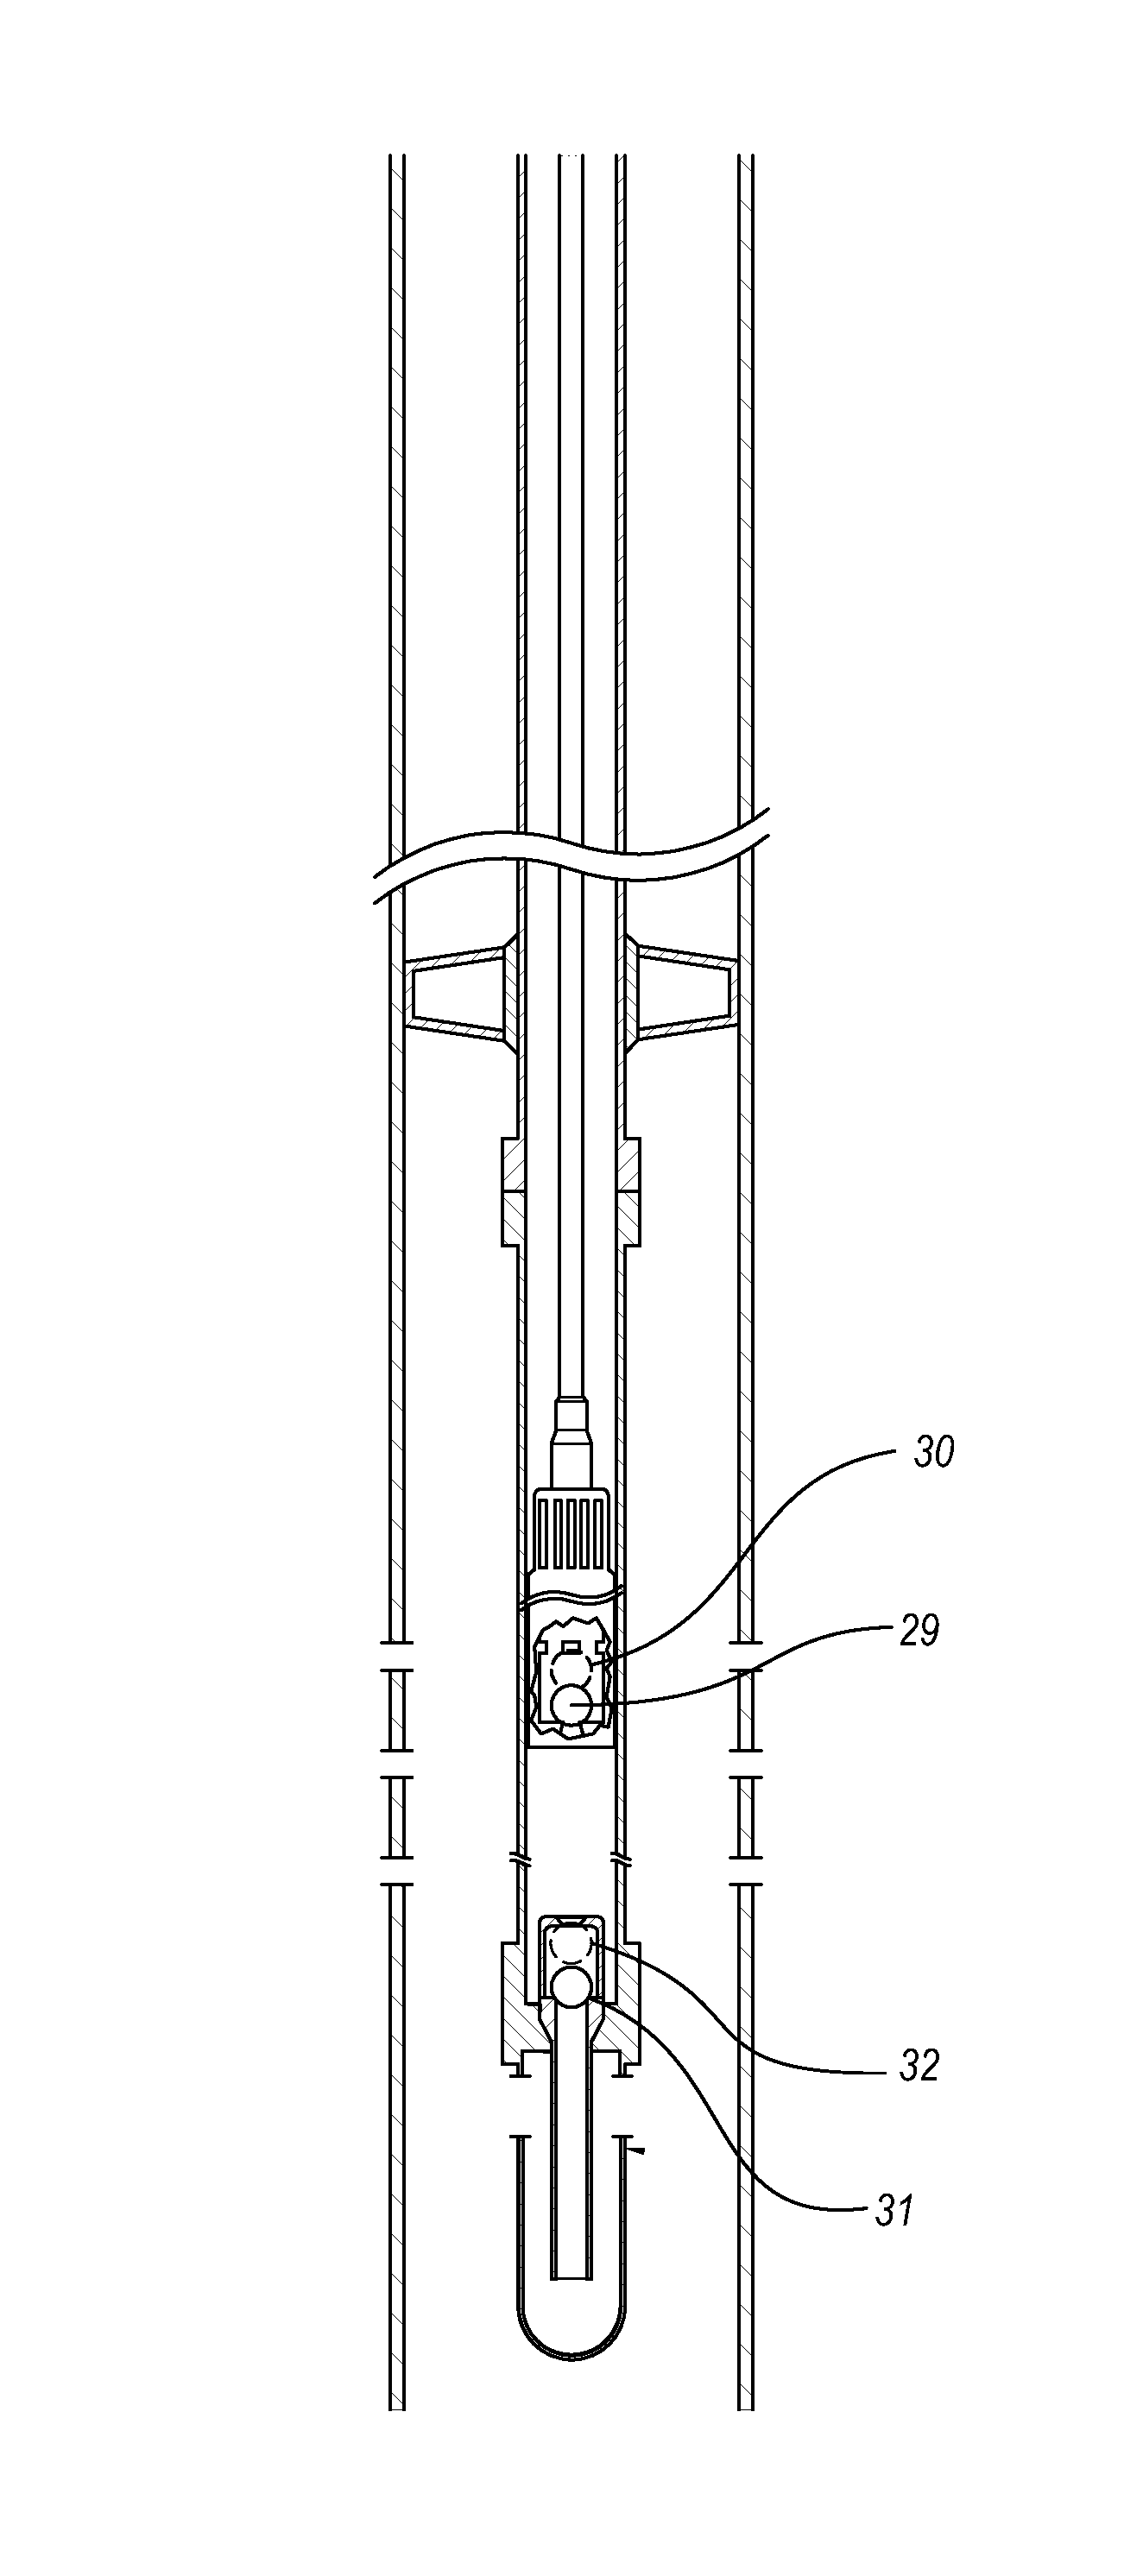 Method and apparatus for autonomous oil and gas well down-hole pump leakage testing